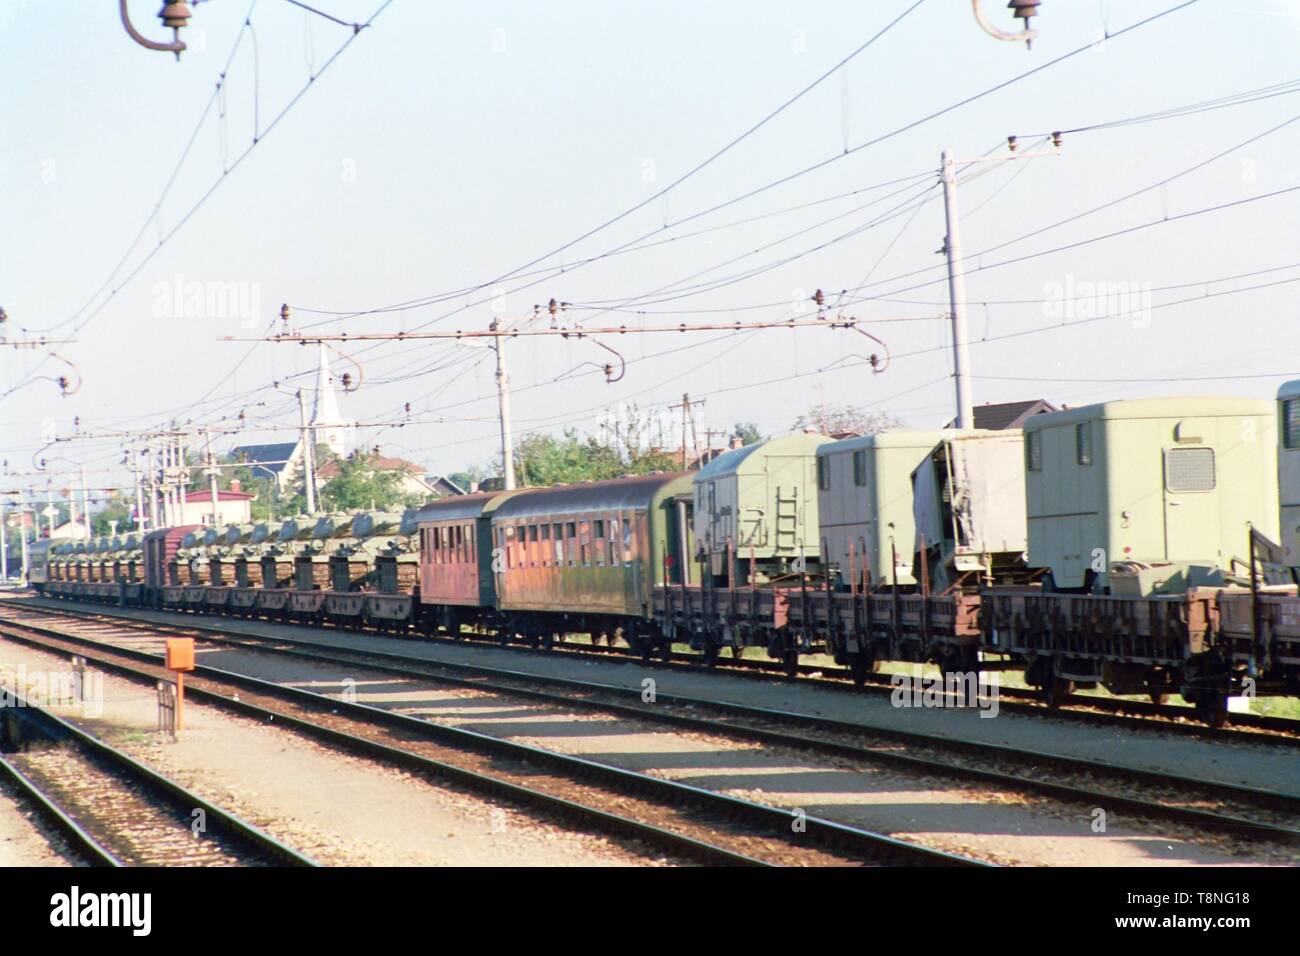 yugoslav-federal-army-tanks-on-a-train-at-dobova-station-on-the-border-between-slovenia-and-croatia-pictured-during-the-break-up-of-yugoslavia-in-1991-picture-by-adam-alexander-T8NG18.jpg